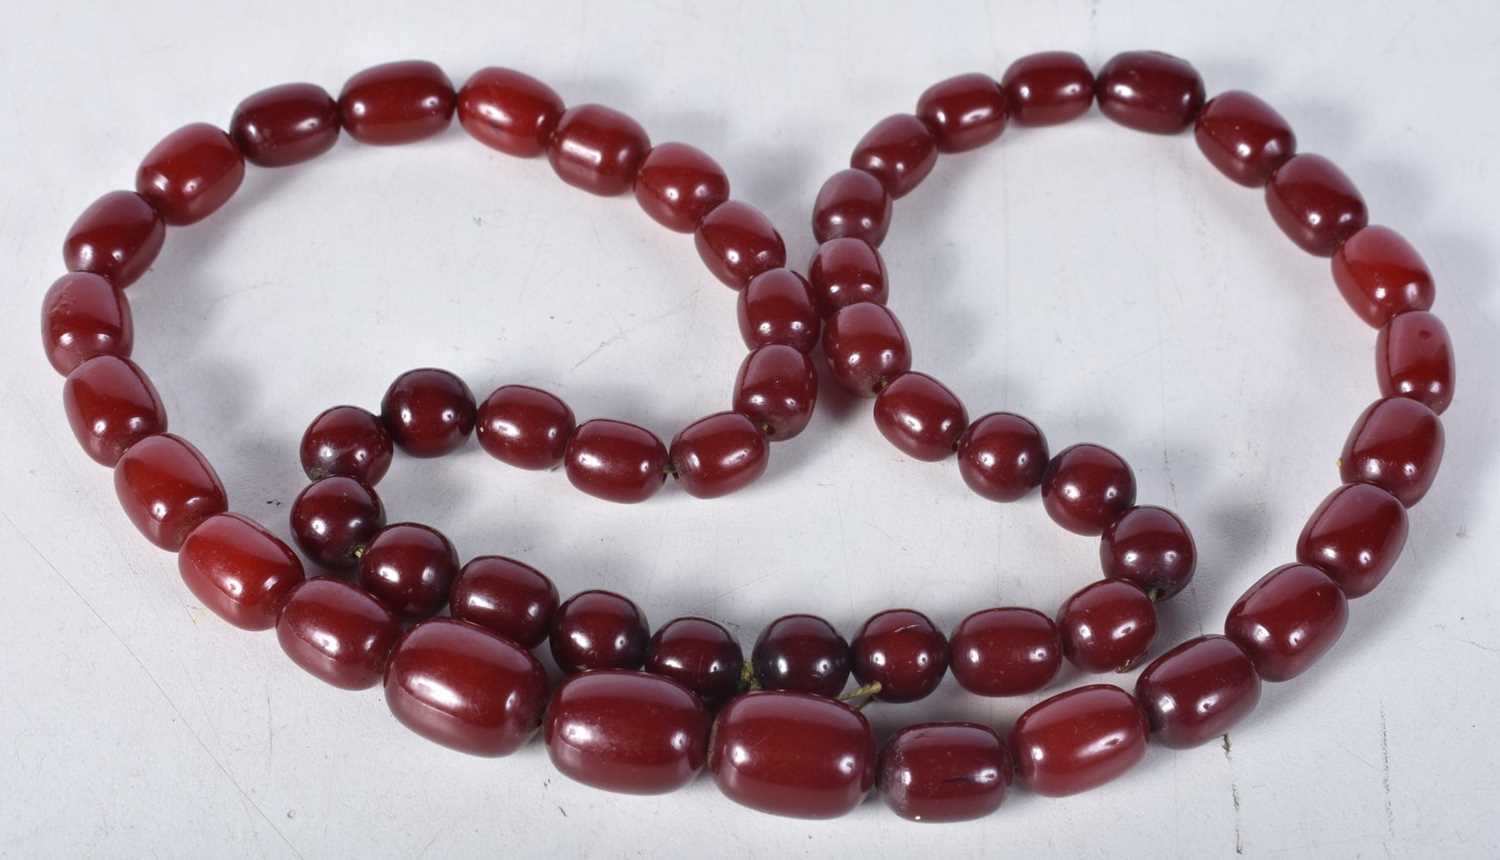 Cherry Bakelite graduated necklace. 83cm long, weight 90g, largest bead 15mm